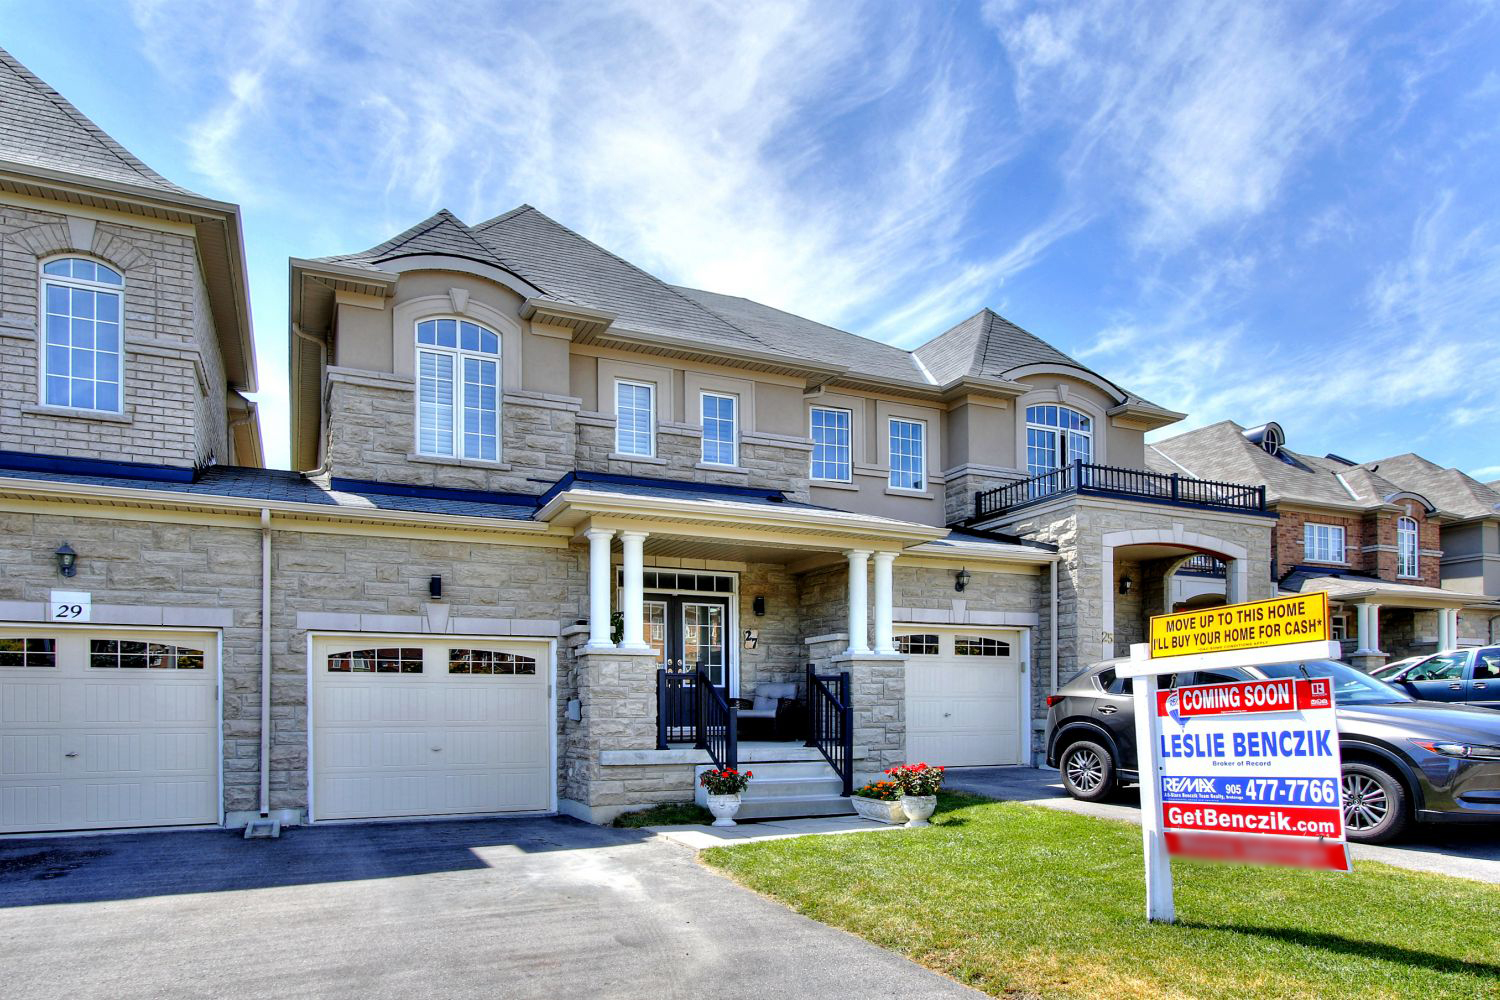 Canada’s Mortgage Qualifying Rate has Dropped